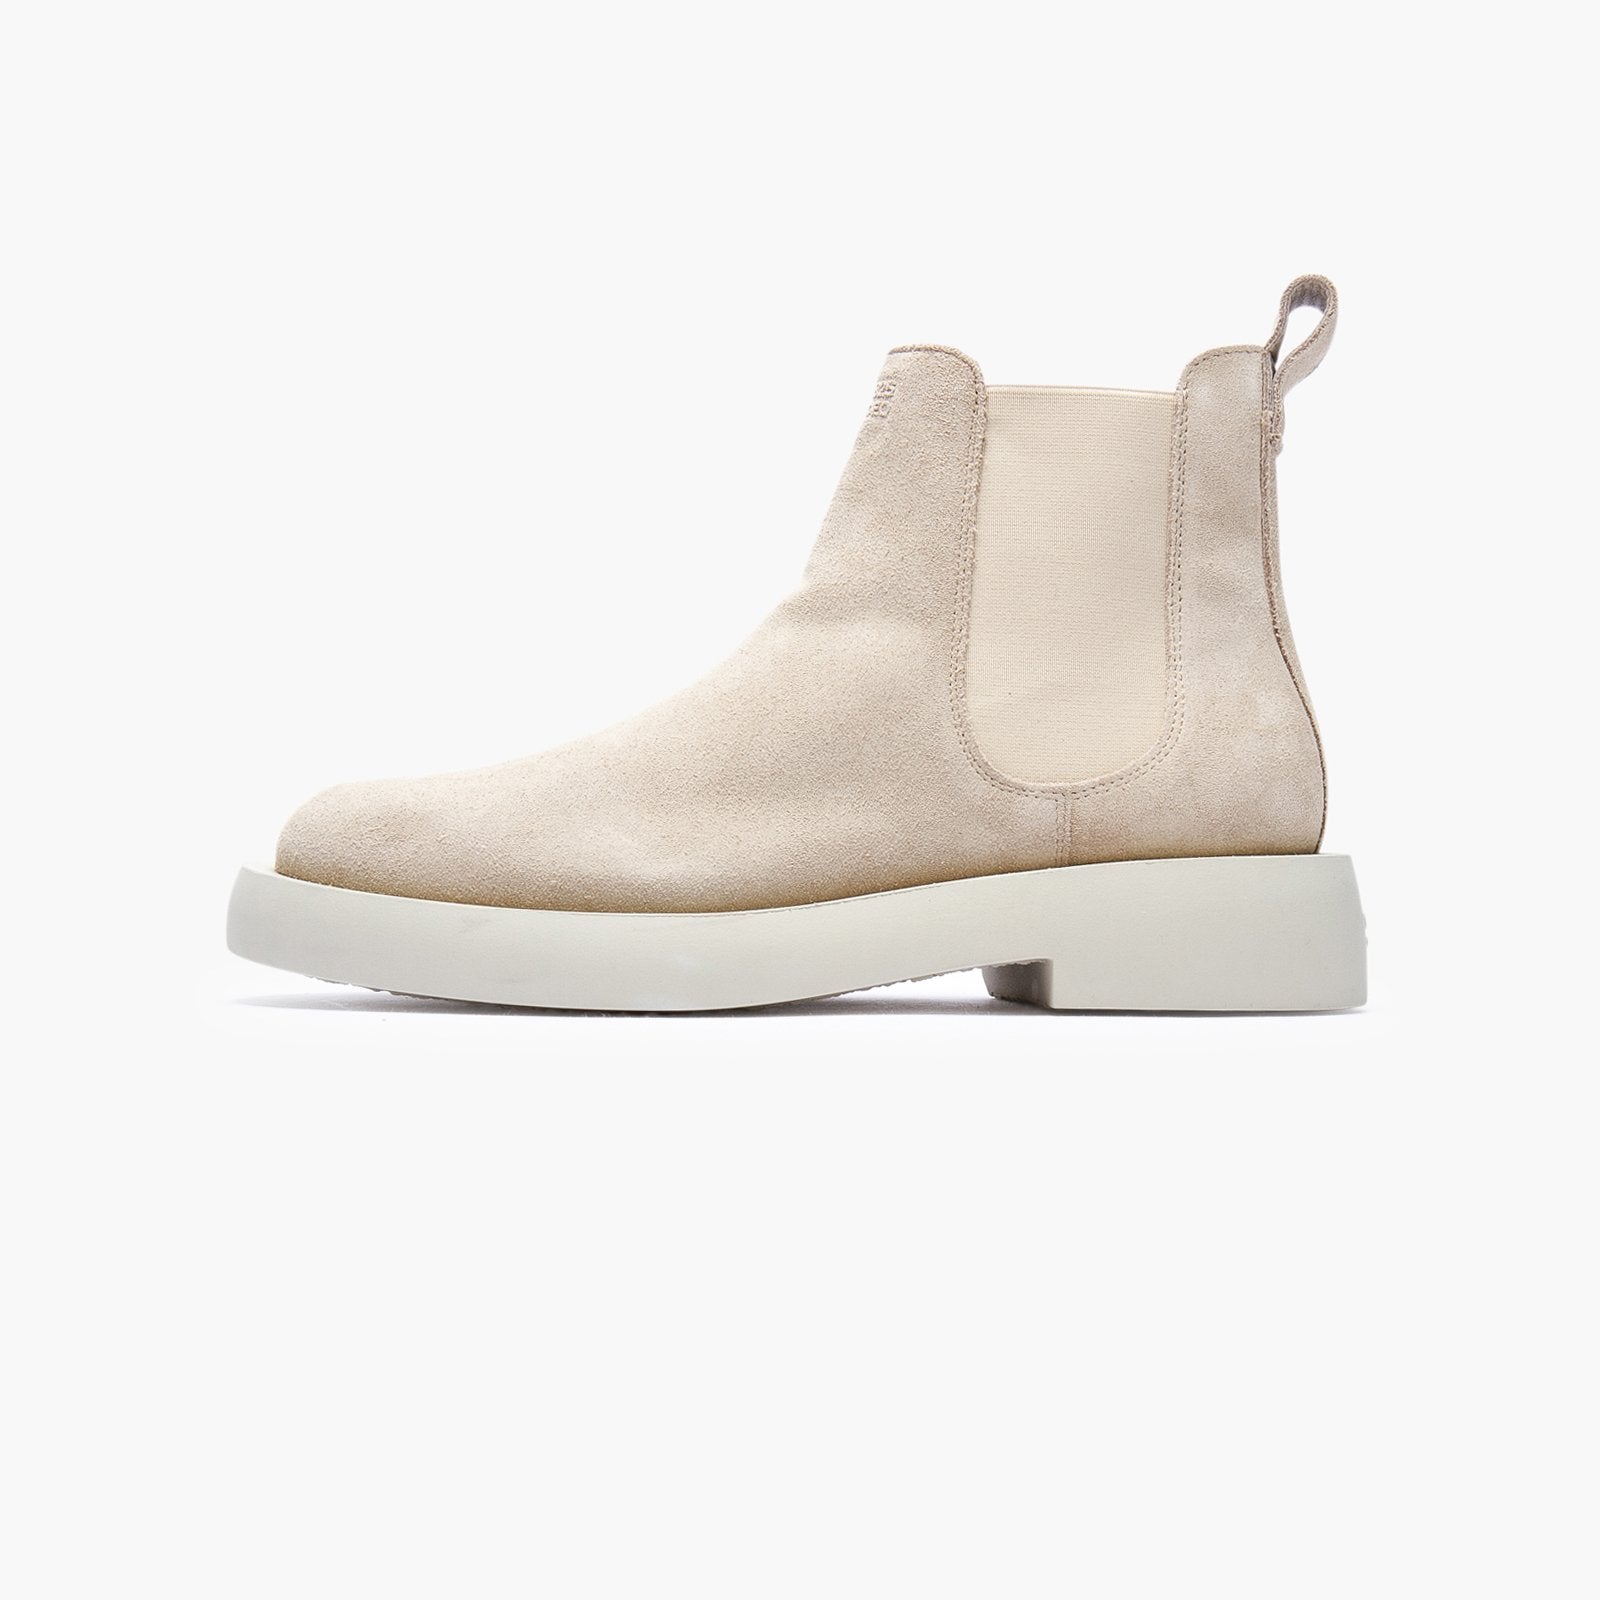 Clarks Mileno Chelsea-26160856_M-Sand-11.5 us-SUEDE Store